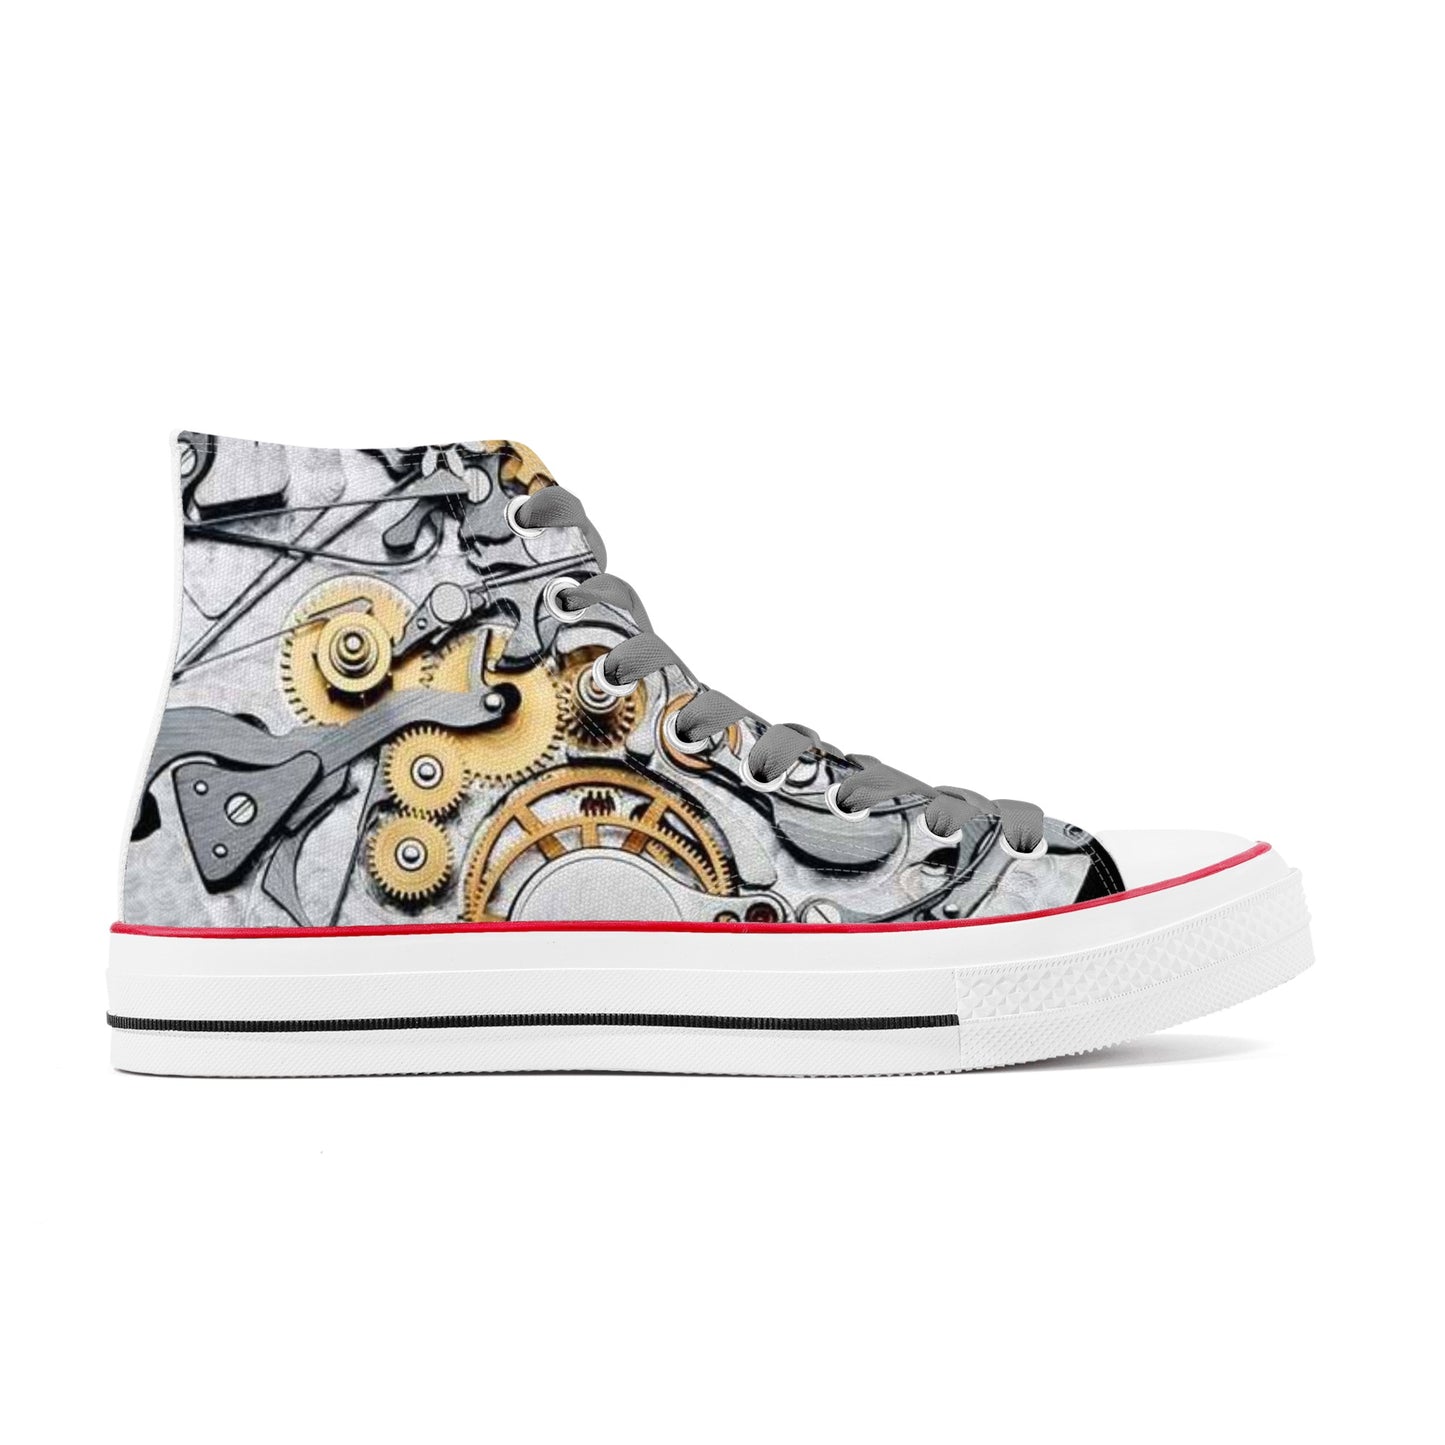 DOPiFiED Womens Classic High Top Canvas Gadgets